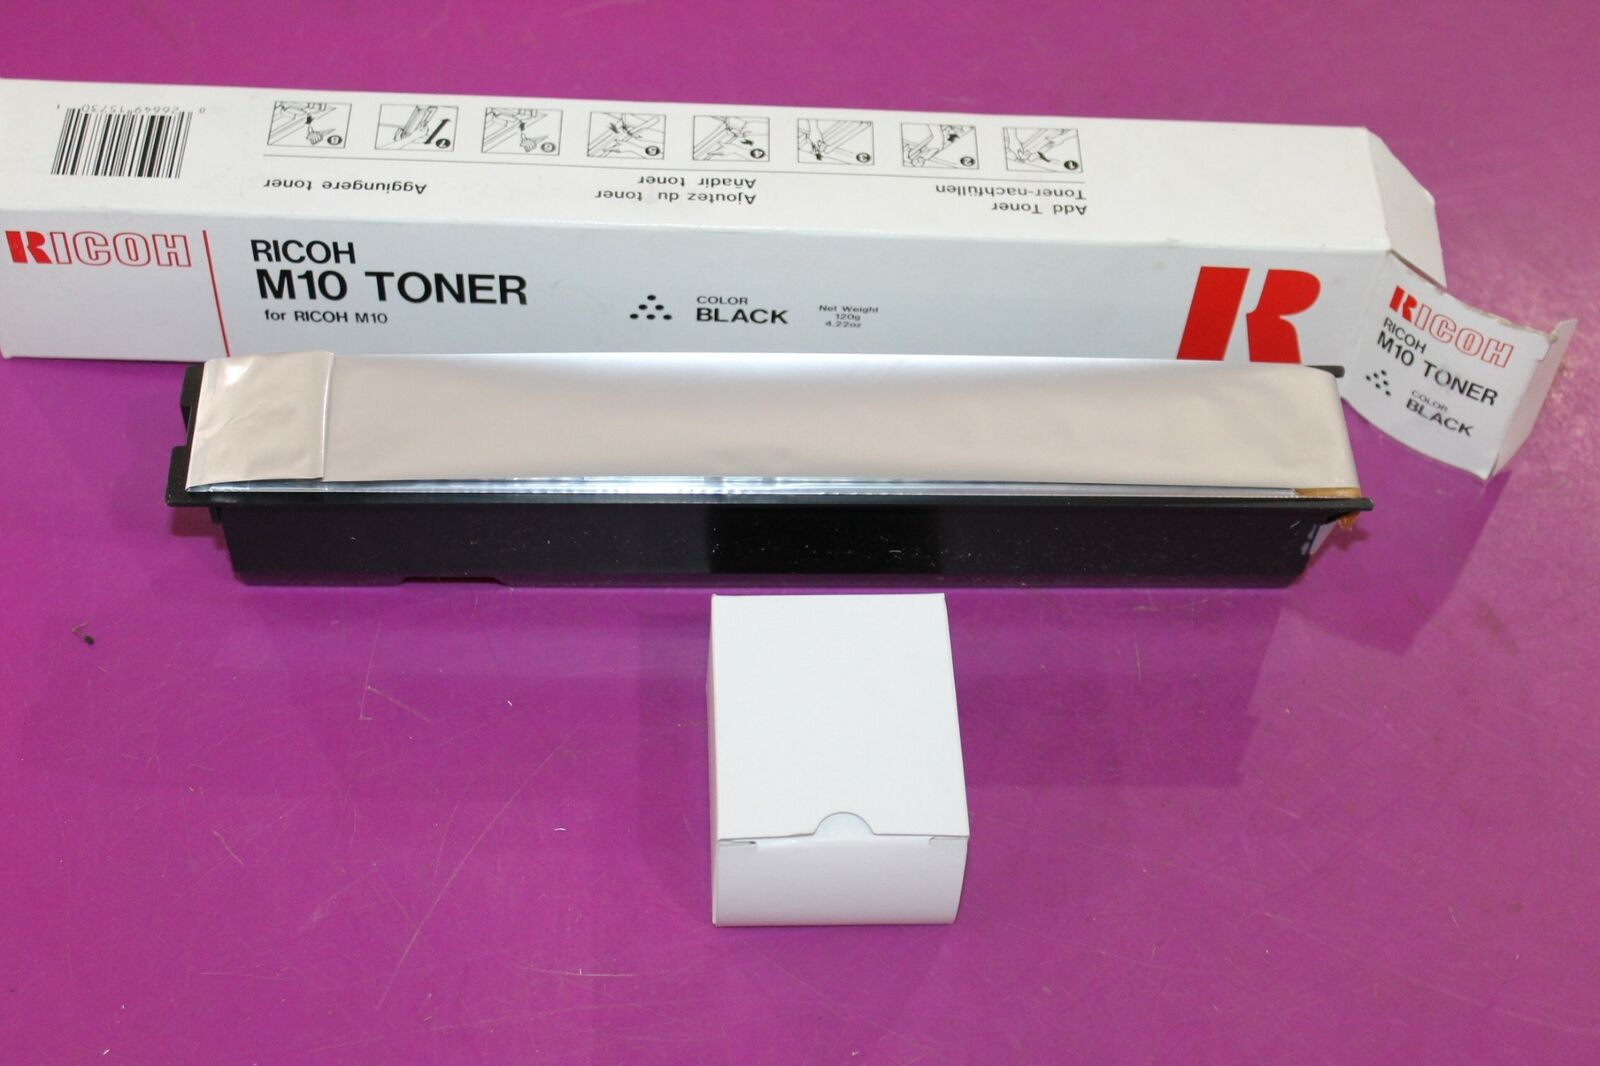 NOS Rico M10 Toner. Never opened. Acquired from a closed dealership. See pic.